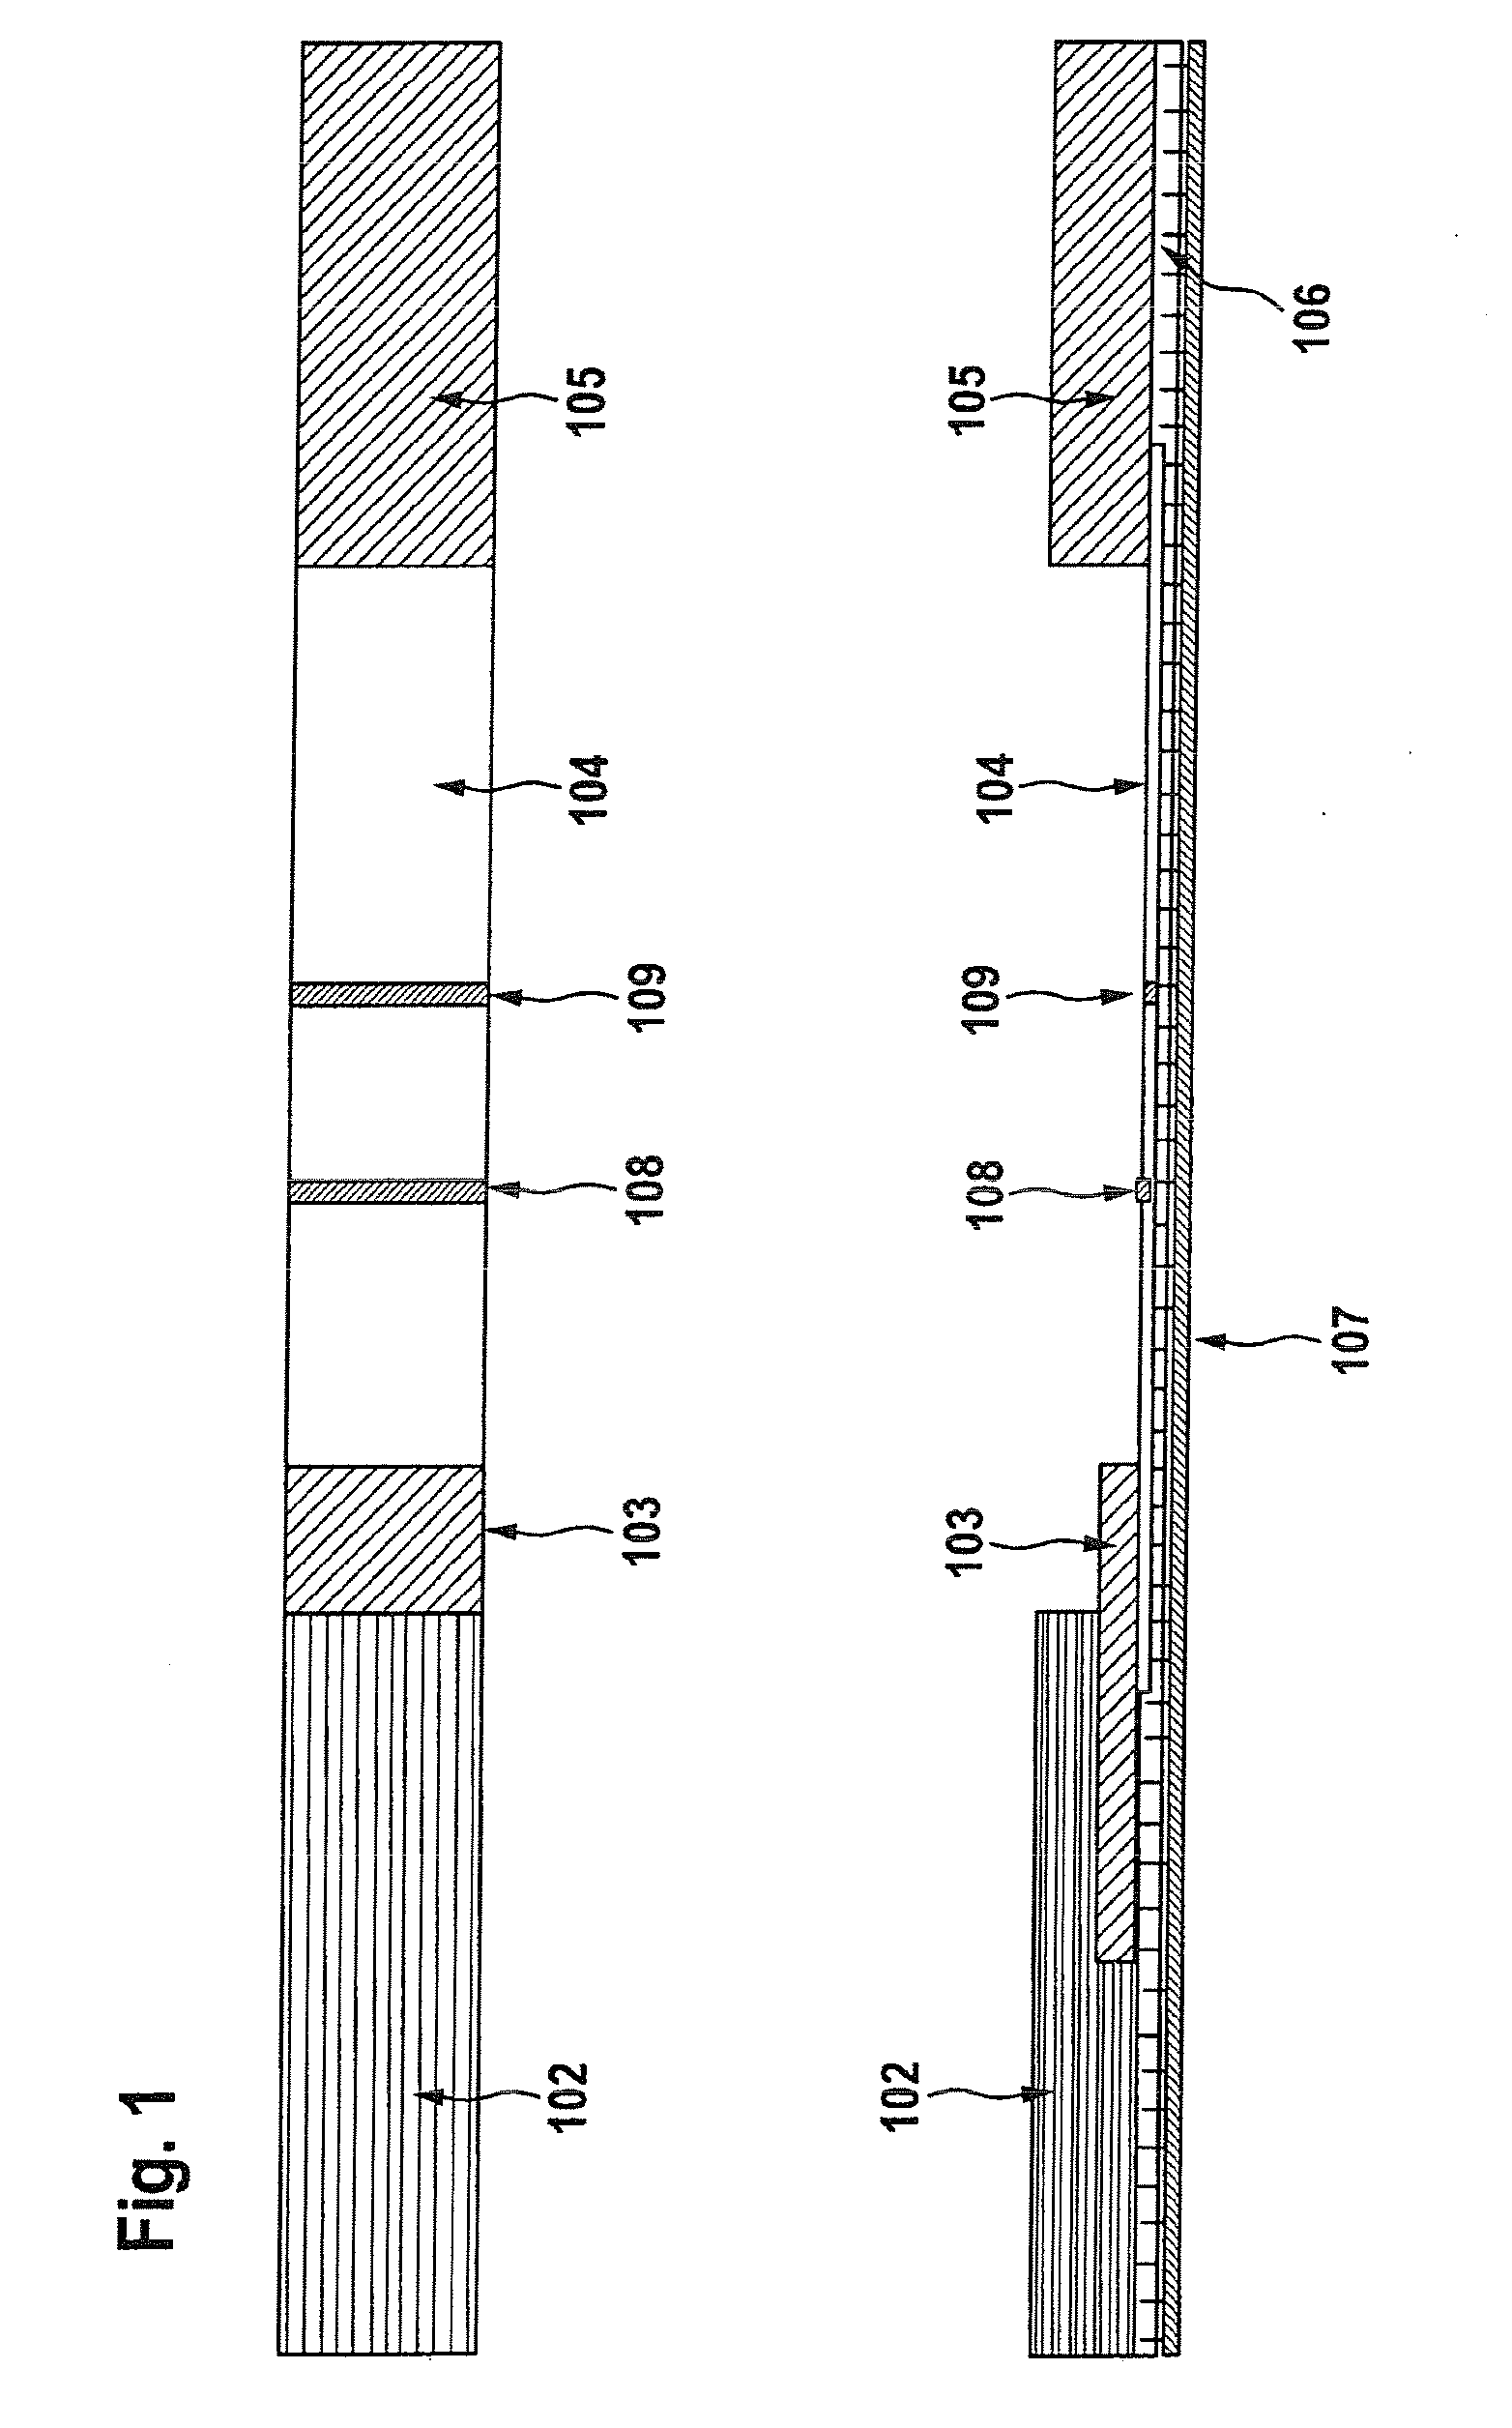 Urinary immunochromatographic multiparameter detection cup